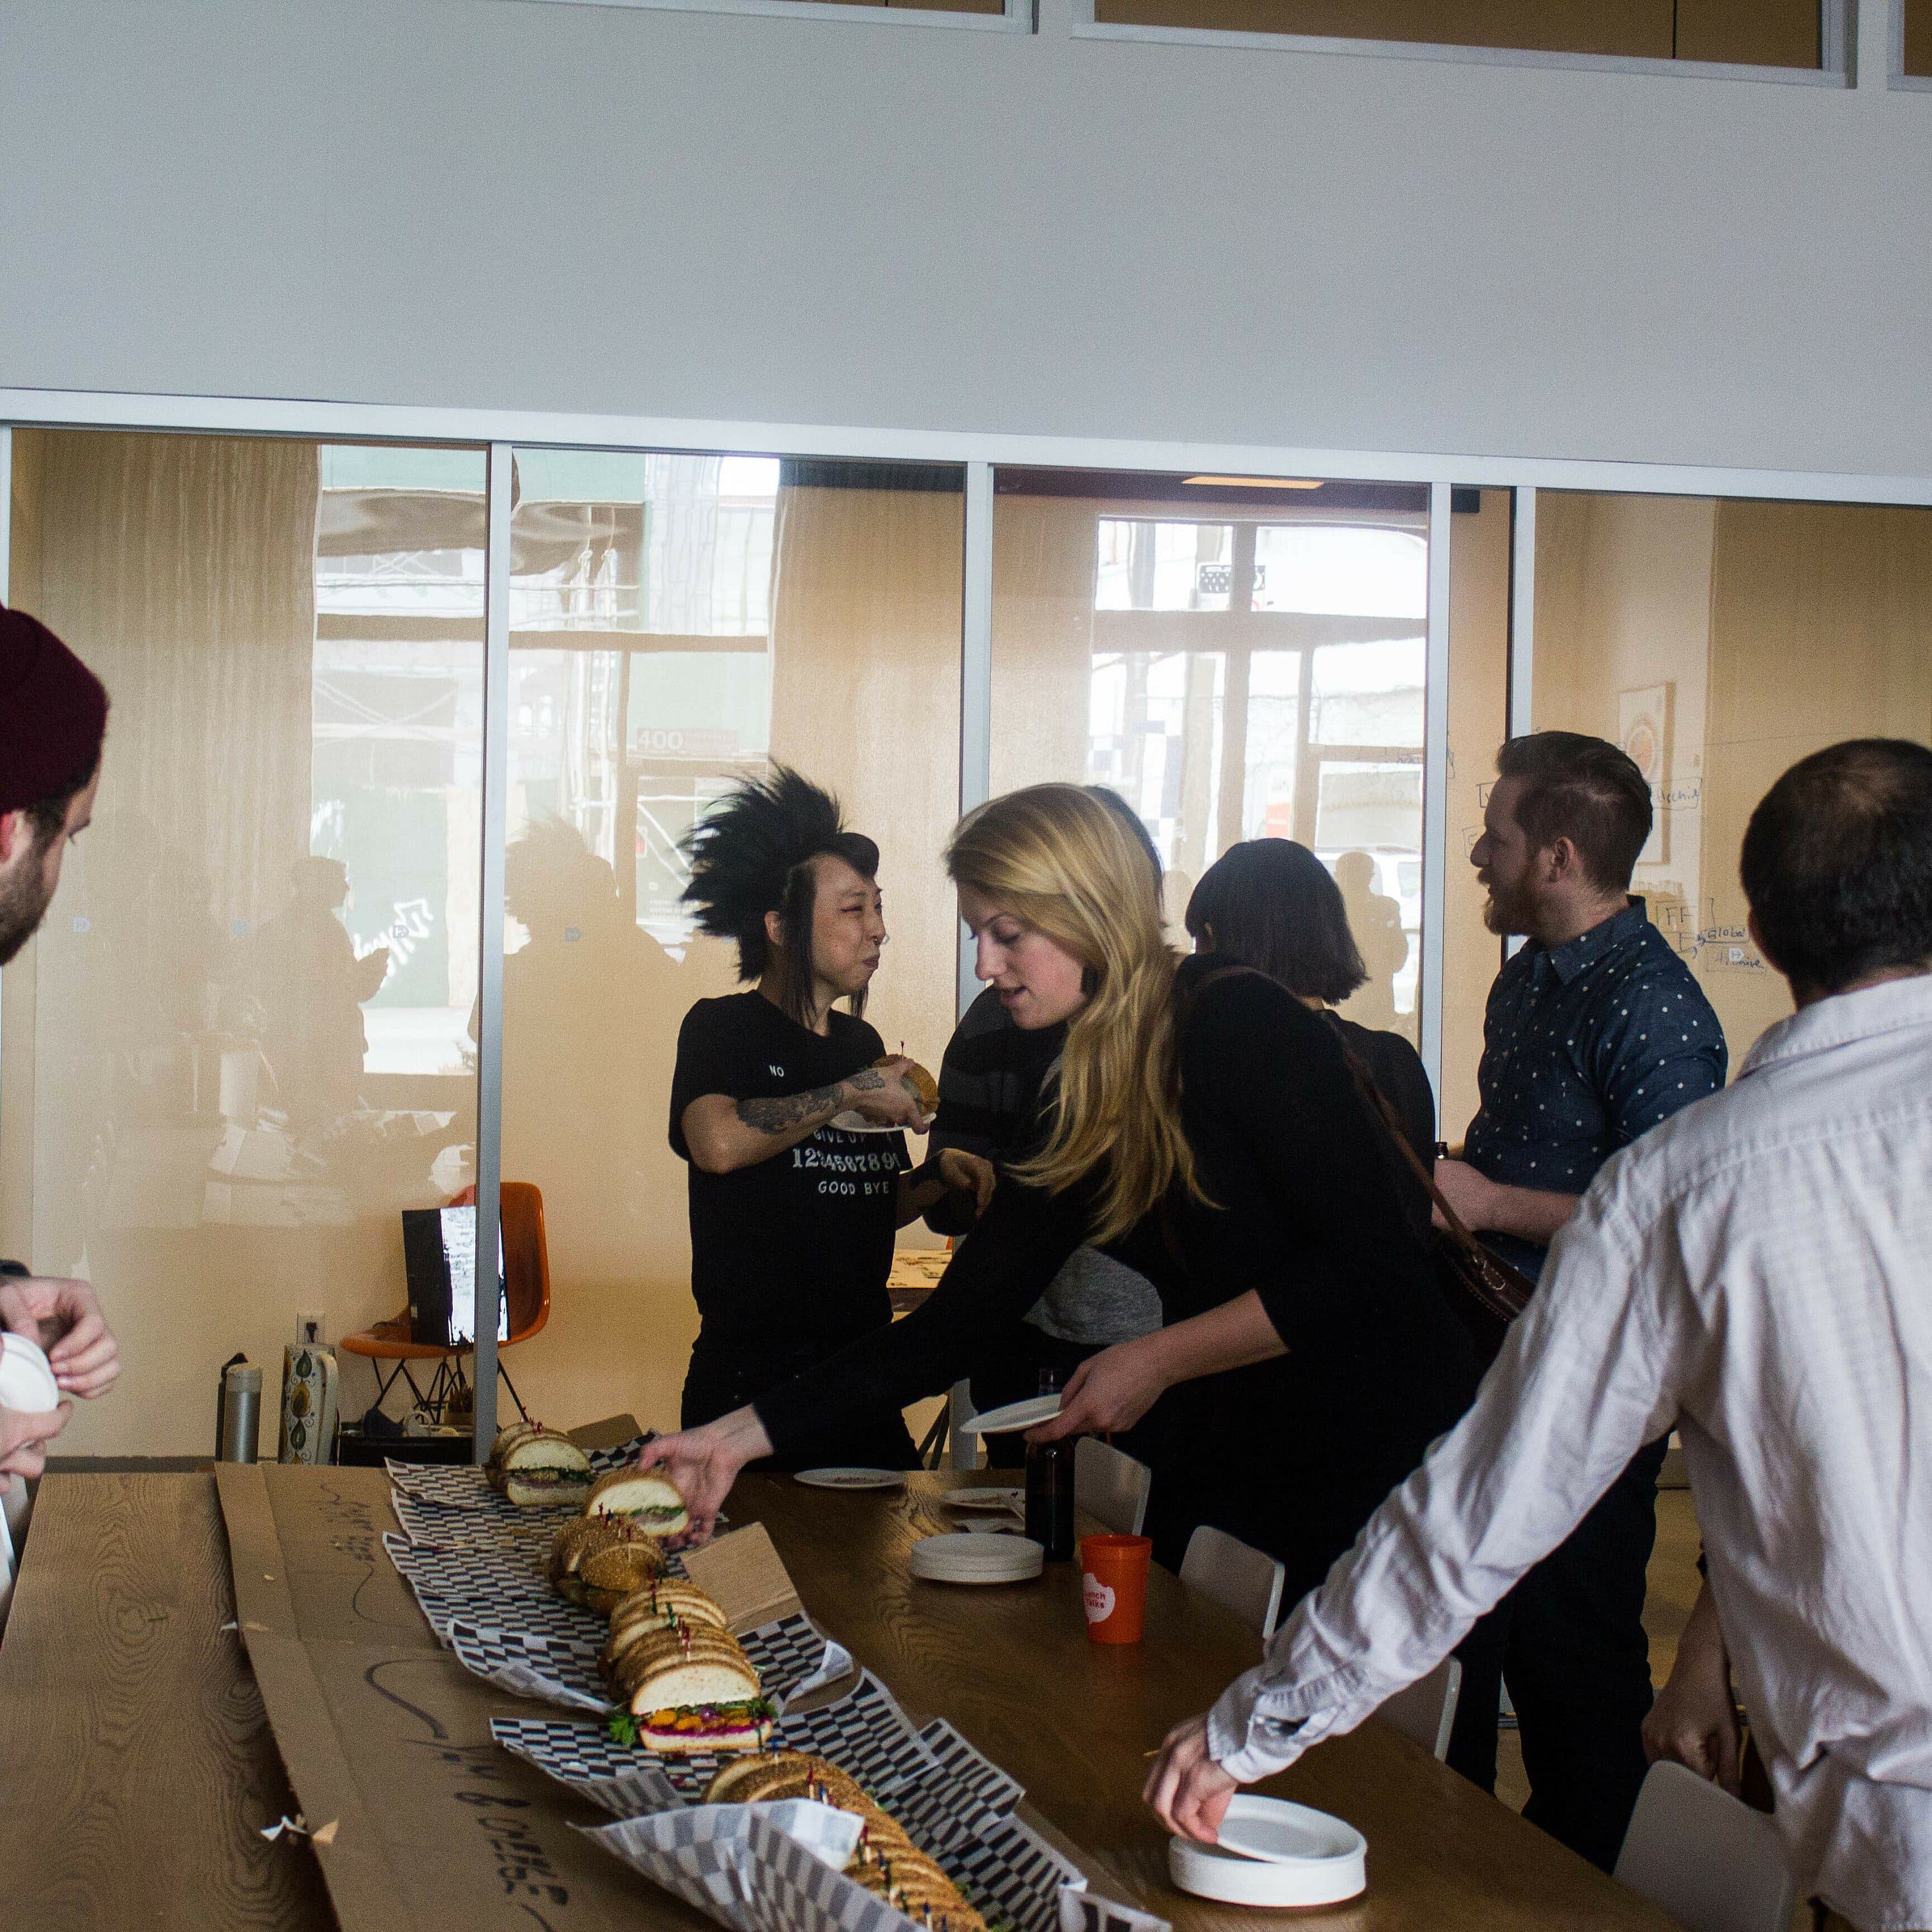 A group of people in a modern office are gathered around a table with assorted sandwiches. Two individuals are reaching for food, while others engage in conversation. One person wears a red beanie, and another has a distinctive hairstyle. Glass partitions are in the background.